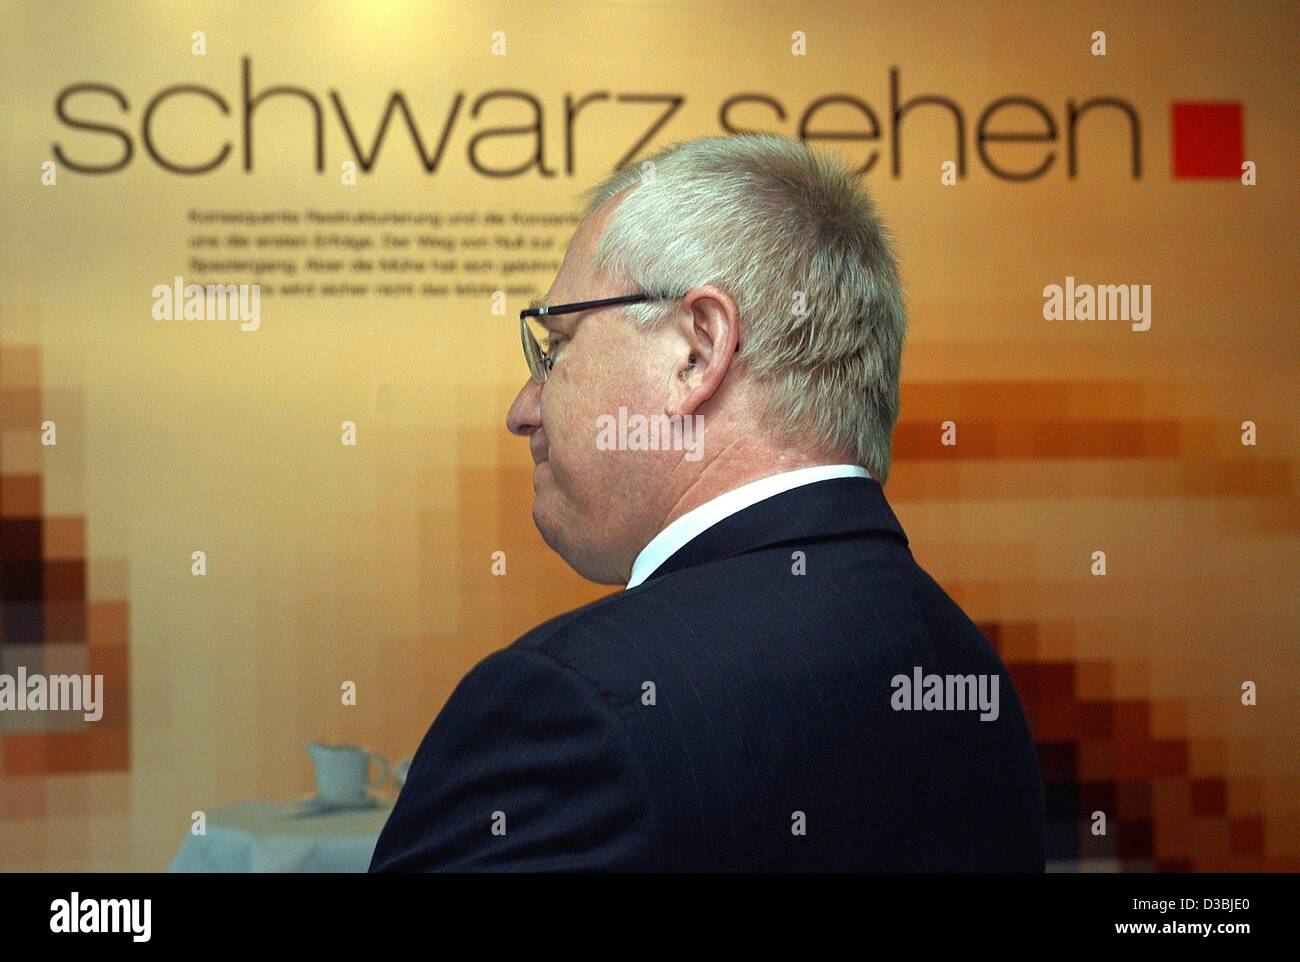 (dpa) - Gerhard Schmid, the founder and former CEO of the German mobile network provider MobilCom, stands in front of the words 'schwarz sehen' (to see black) during the general meeting in Hamburg, 26 May 2003. The shareholders reproached Schmid in several speeches for deliberately interfering in th Stock Photo